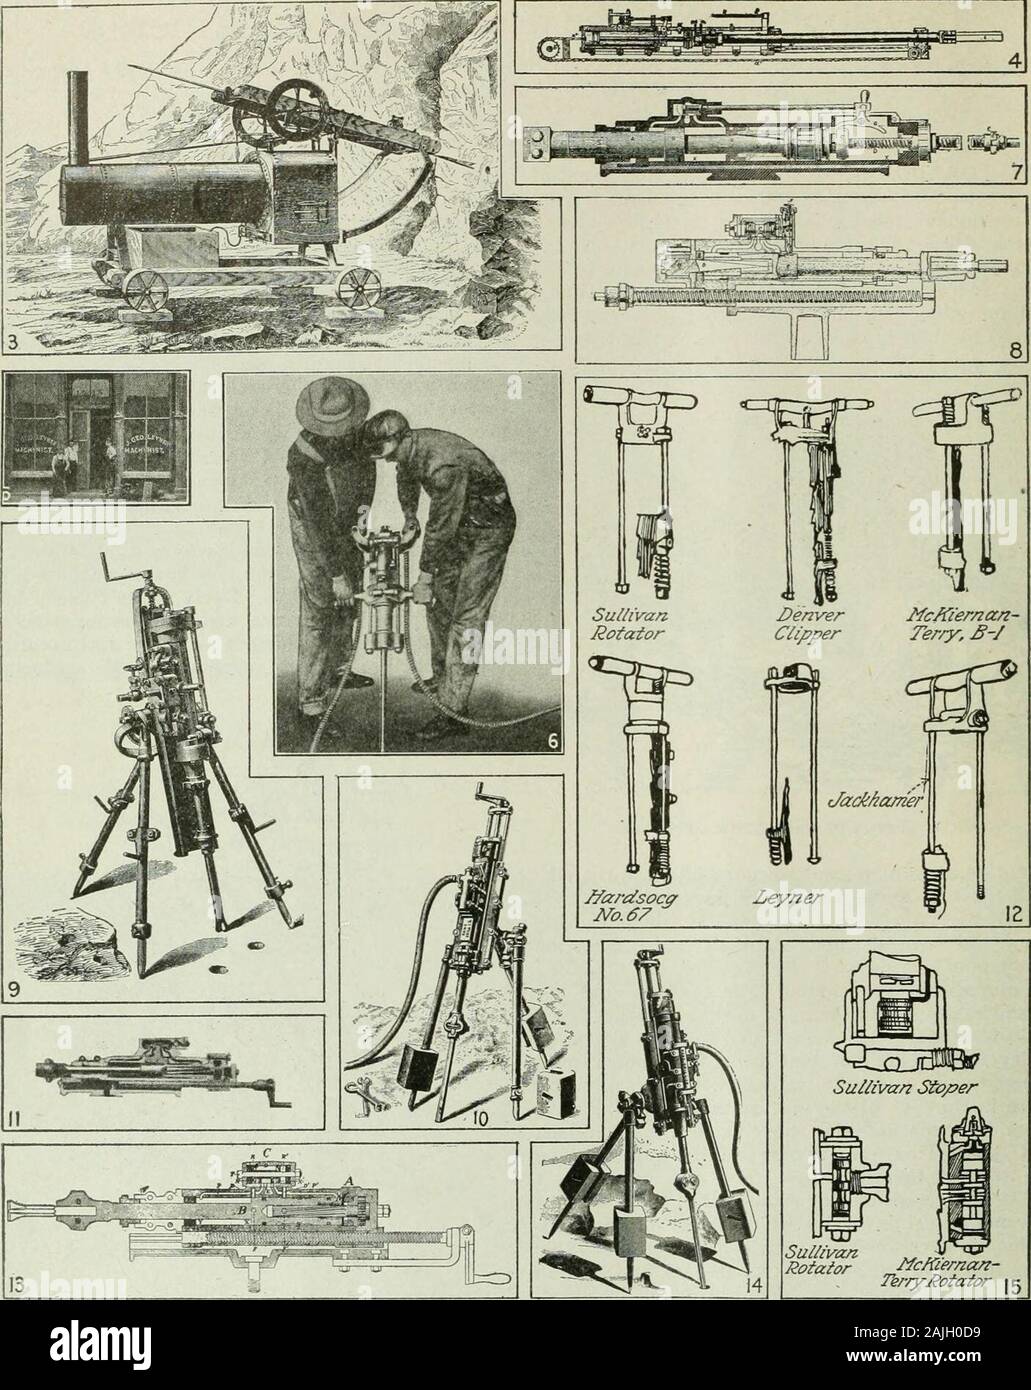 E/MJ : engineering and mining journal . FIG. 2 MINER WITH SINGLE-JACK AND STEEL involved in the primitive method of single-jack andsteel. There is no questioning the debt which the miningindusti-y owes to the invention of the reciprocatingtype of rock drill, but it remained for a Westernman, Mr. Leyner, born and raised amidst the hustleand bustle of the mining camps of Colorado, to takea real scientific step forwaid in the art of drilling 678 Engineering and Mining Journal Vol. 108, No, 17. Suliivan ,. , ,.Rotaior NcKiema/z- rerryj?otafor jg GENERAL TYPES OF POWER ROCK DRILLS AND PARTS—L Fig. Stock Photo